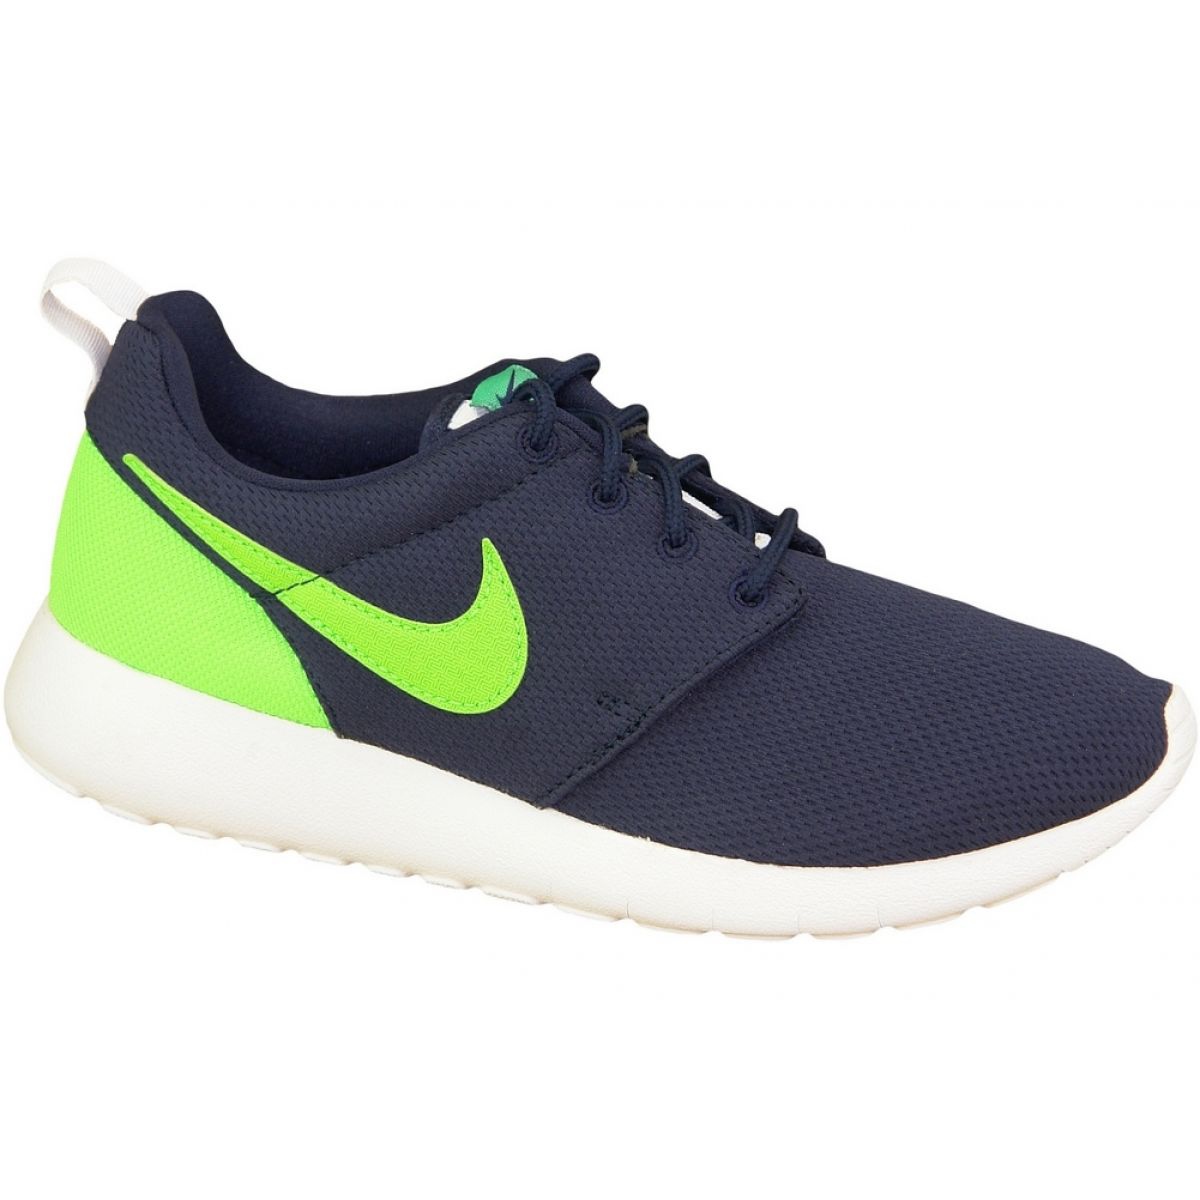 Nike Roshe One Gs W 599728-413 shoes navy blue green KeeShoes